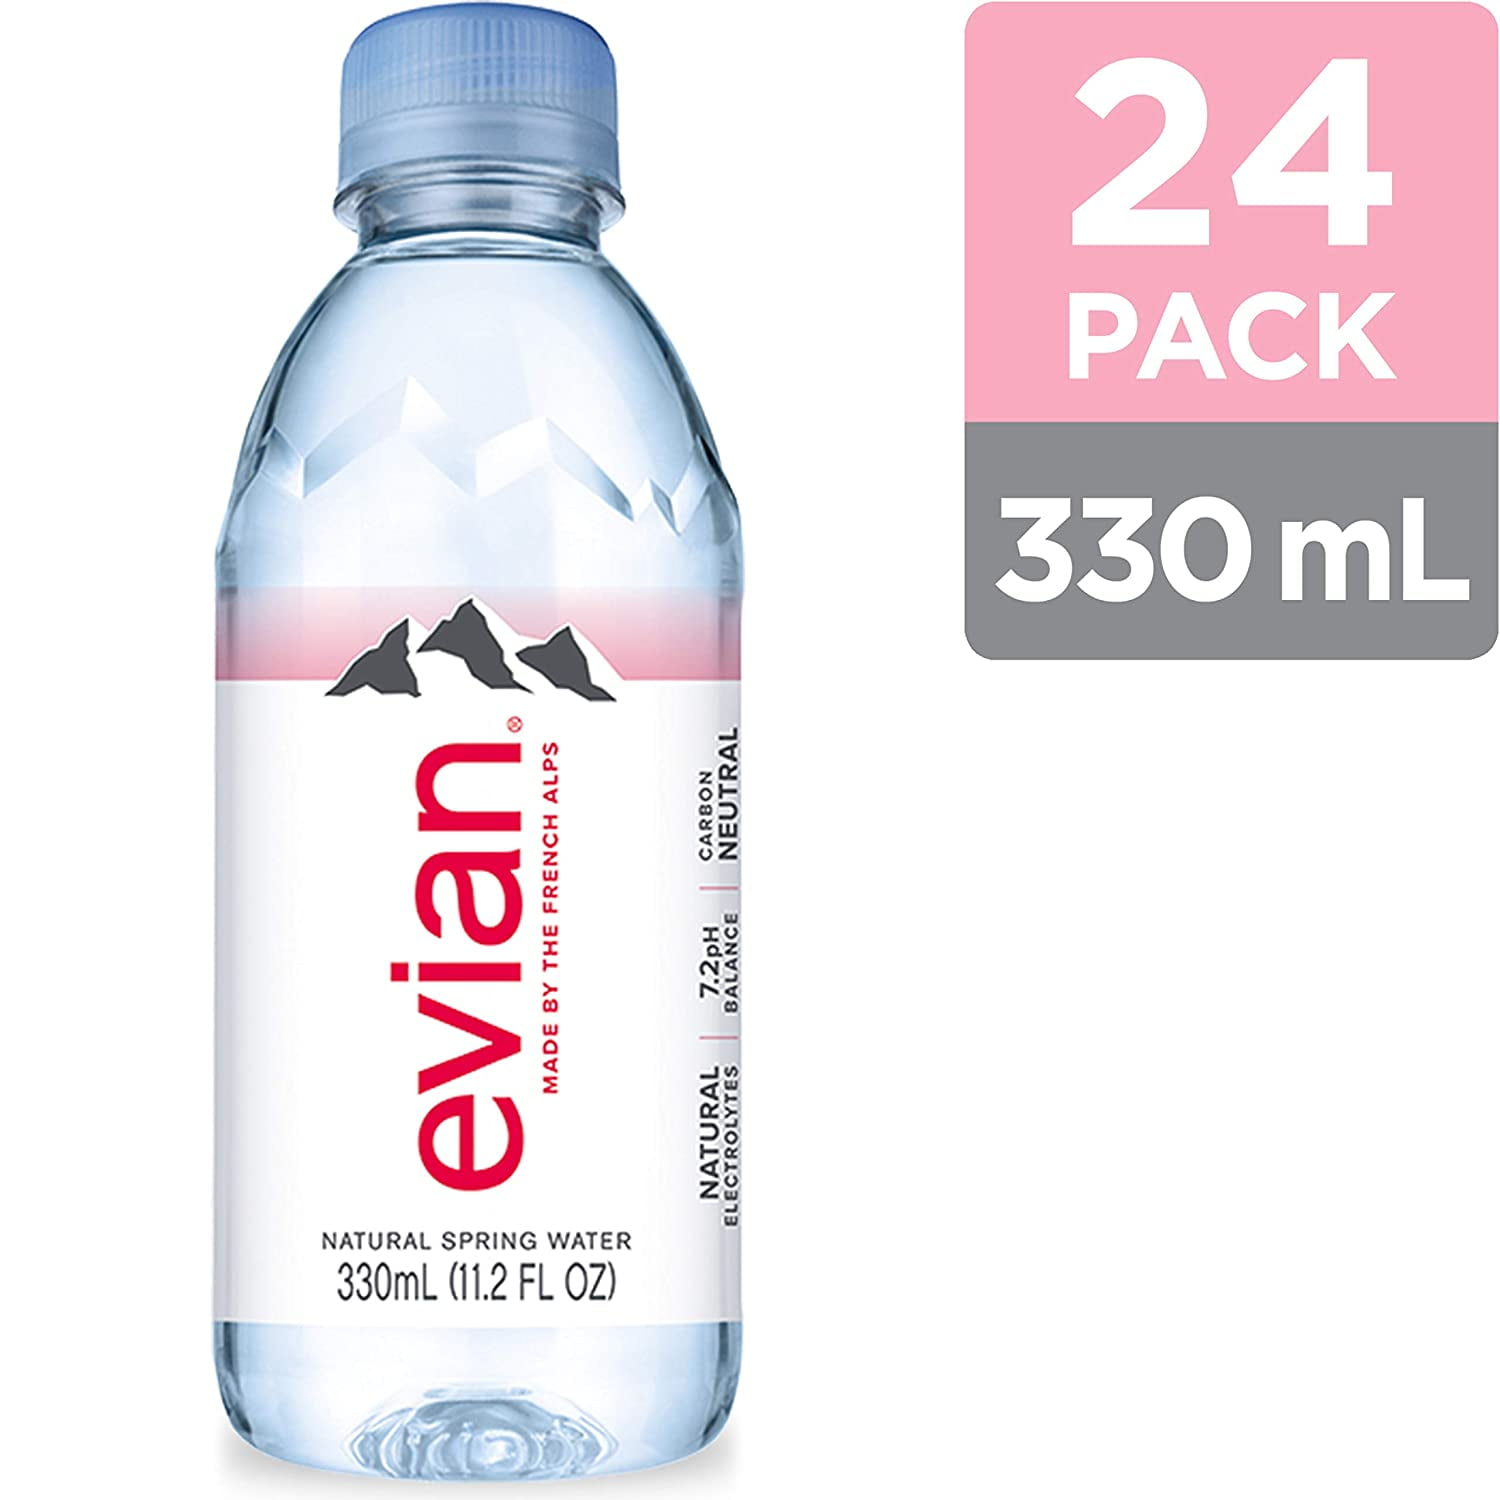 evian Natural Spring Water 330 mL/11.2 Fl Oz (Pack of 24) Mini-Bottles, Naturally Filtered Spring Water Small Water Bottles - 1